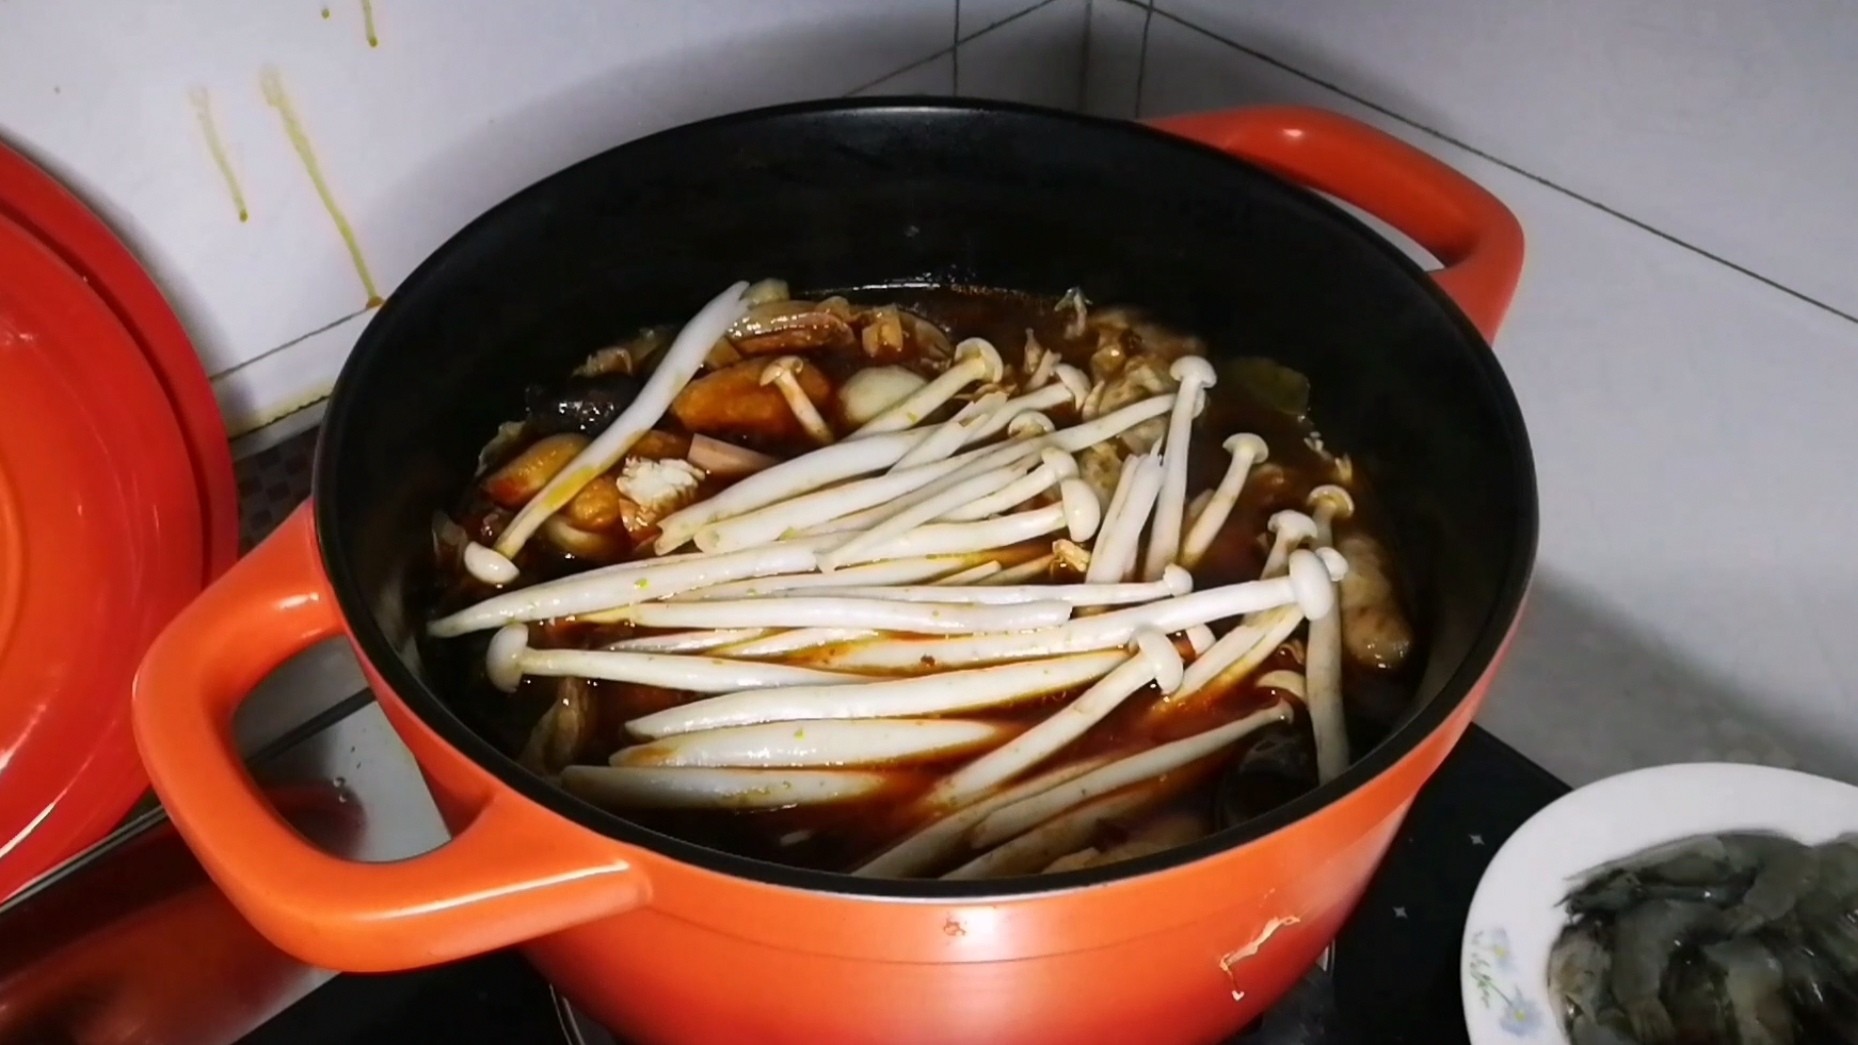 Lazy Family Hot Pot, Once Lazy to The End, The Bowl Will be Easy to Brush Up recipe